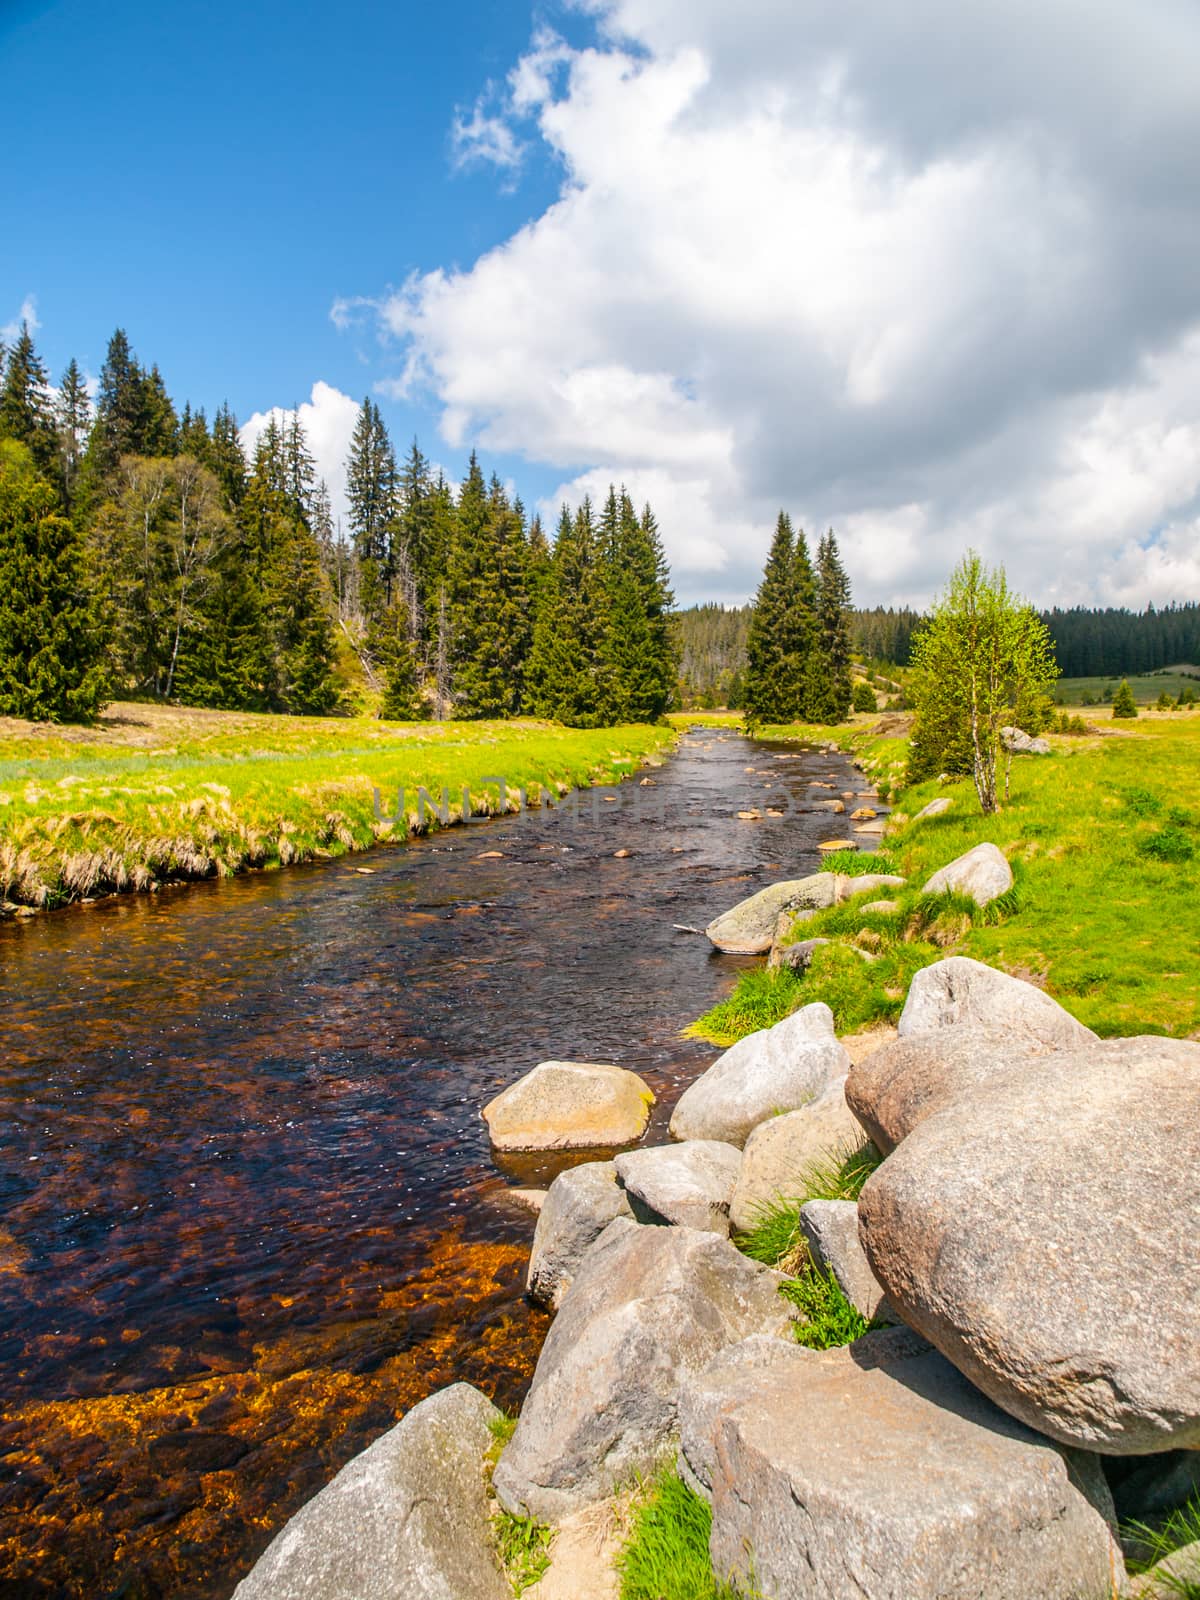 Idyllic landscape with calm mountain river on sunny day. White stones and green meadows and trees. Sumava National Park, Bohemian Forest, Czech Republic by pyty